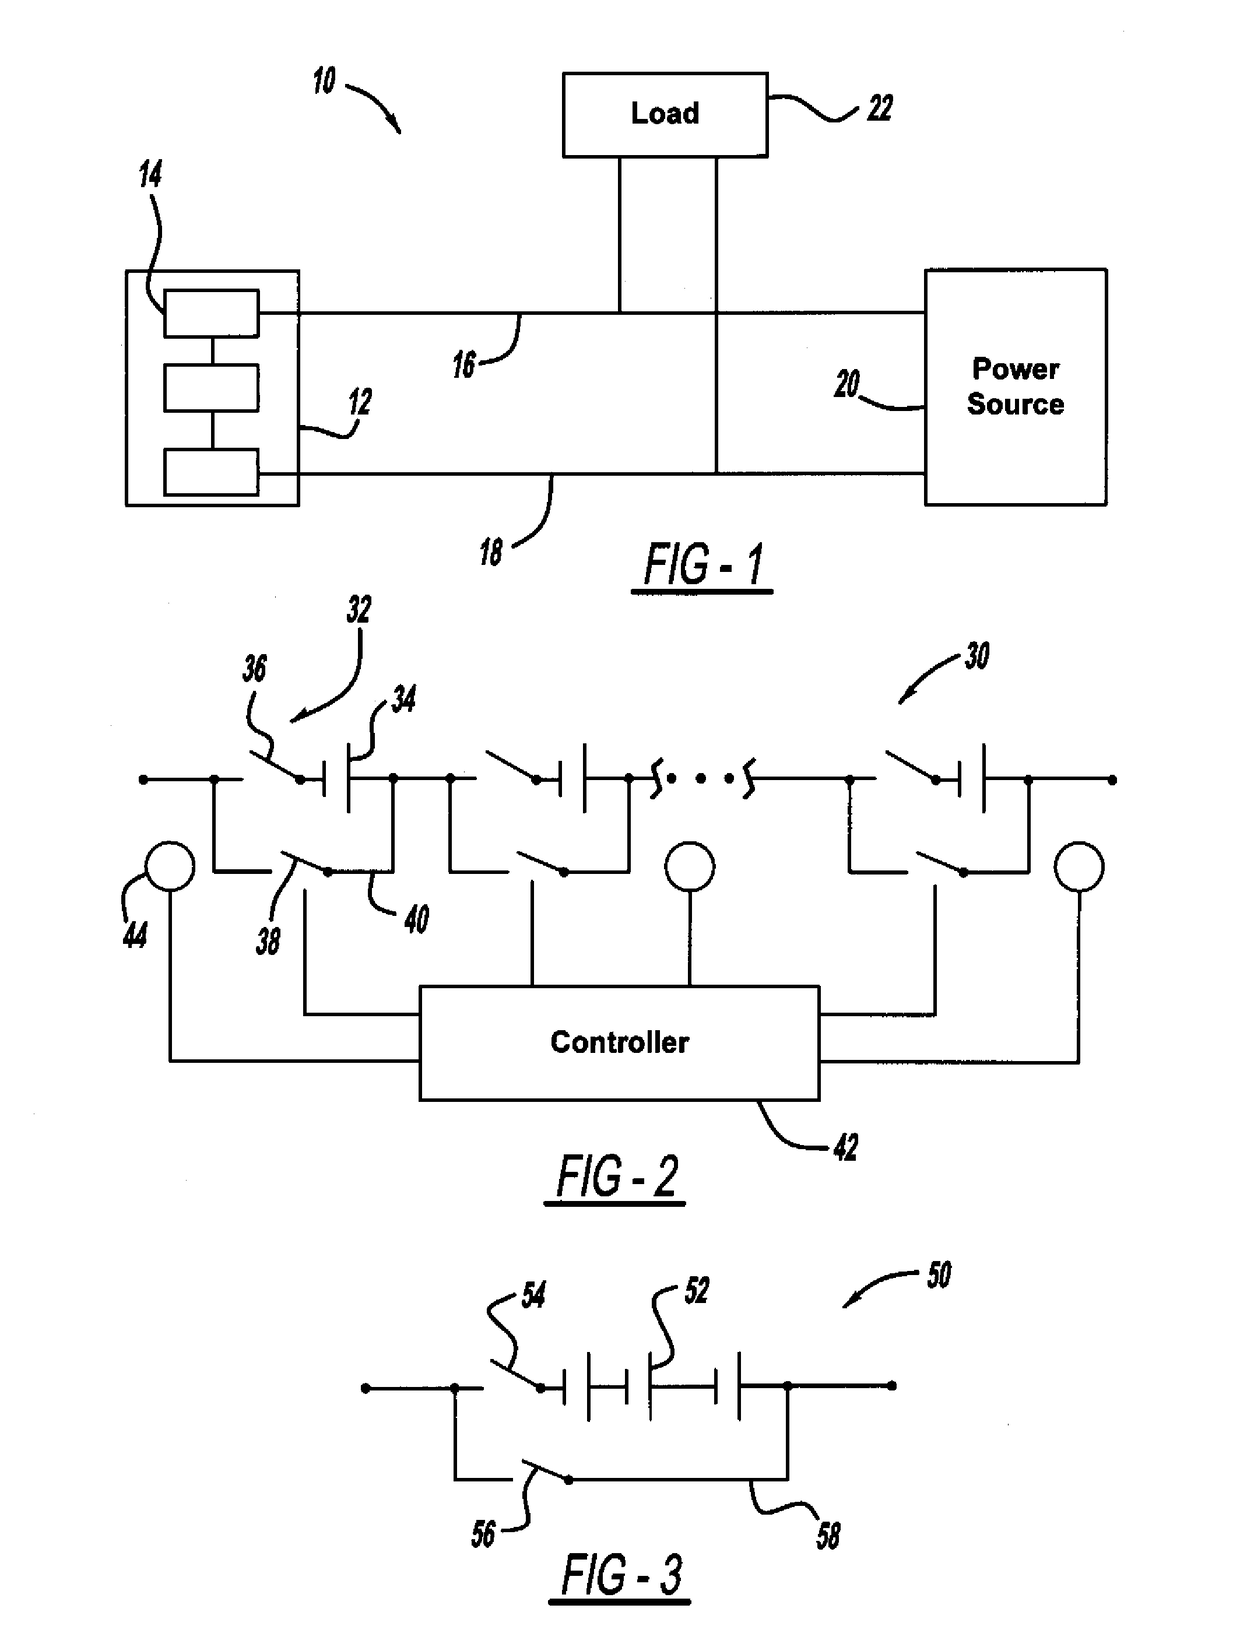 Battery fault tolerant architecture for cell failure modes parallel bypass circuit